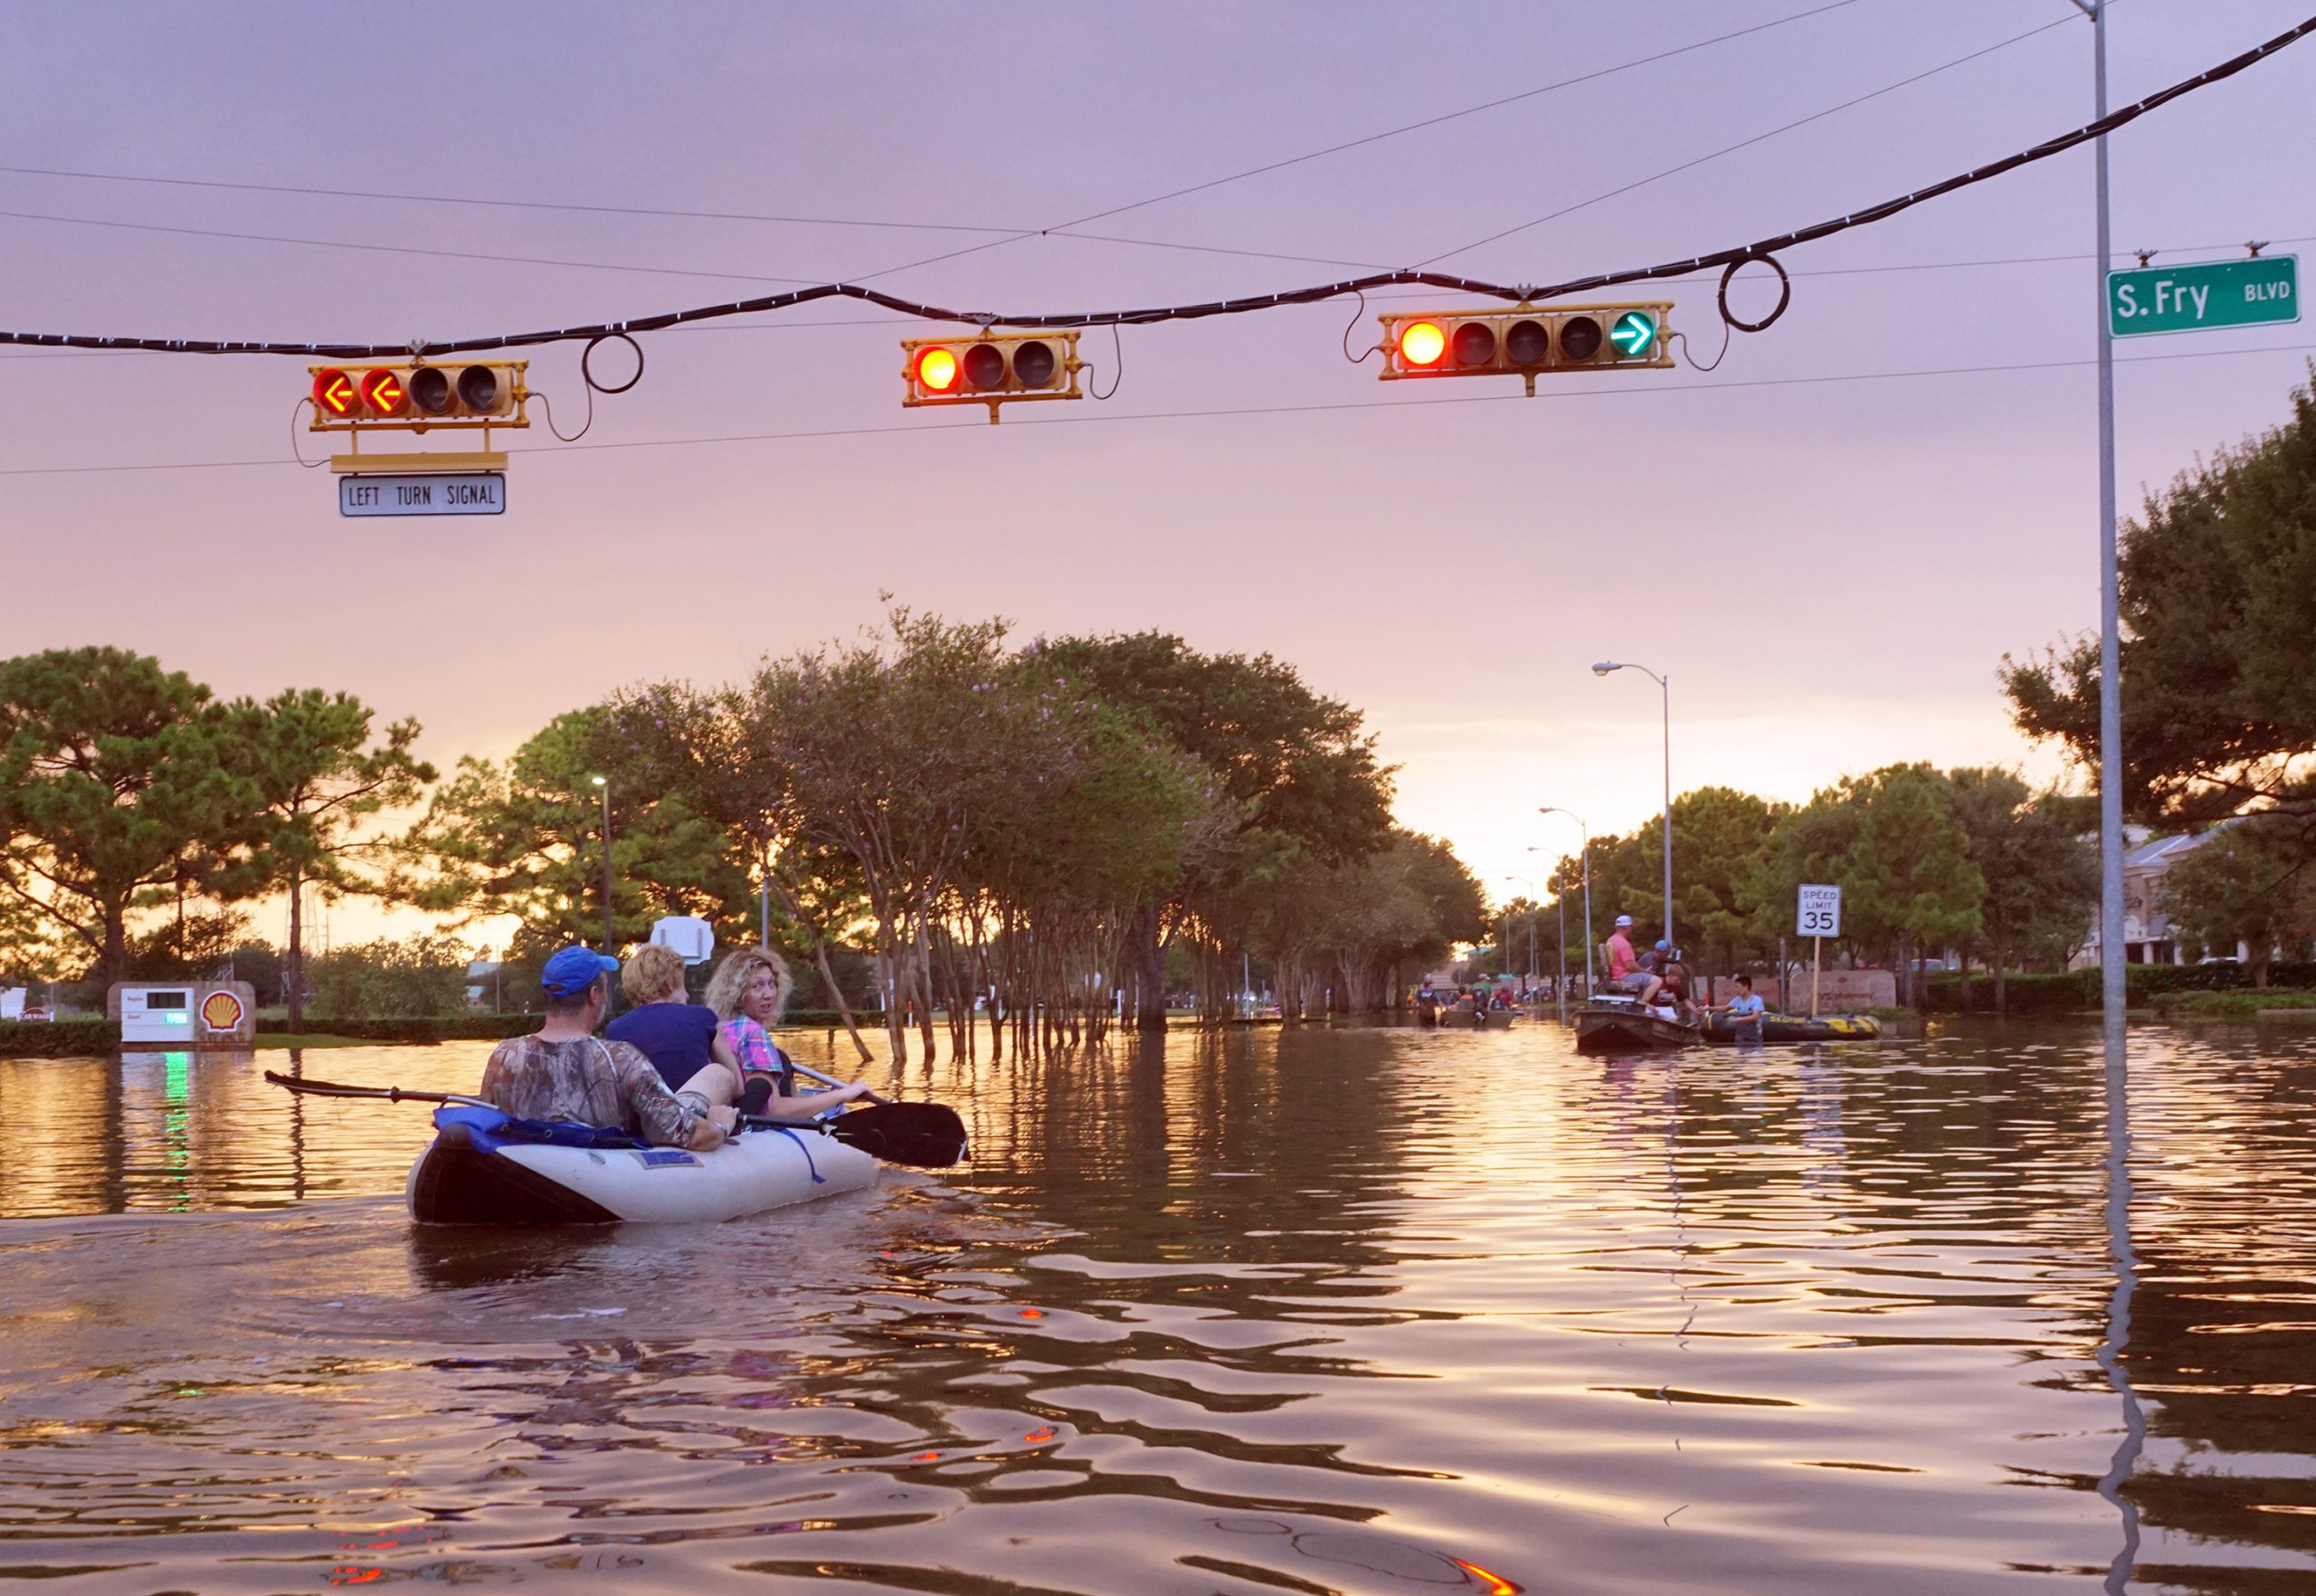 People paddle in a canoe down a flooded street.